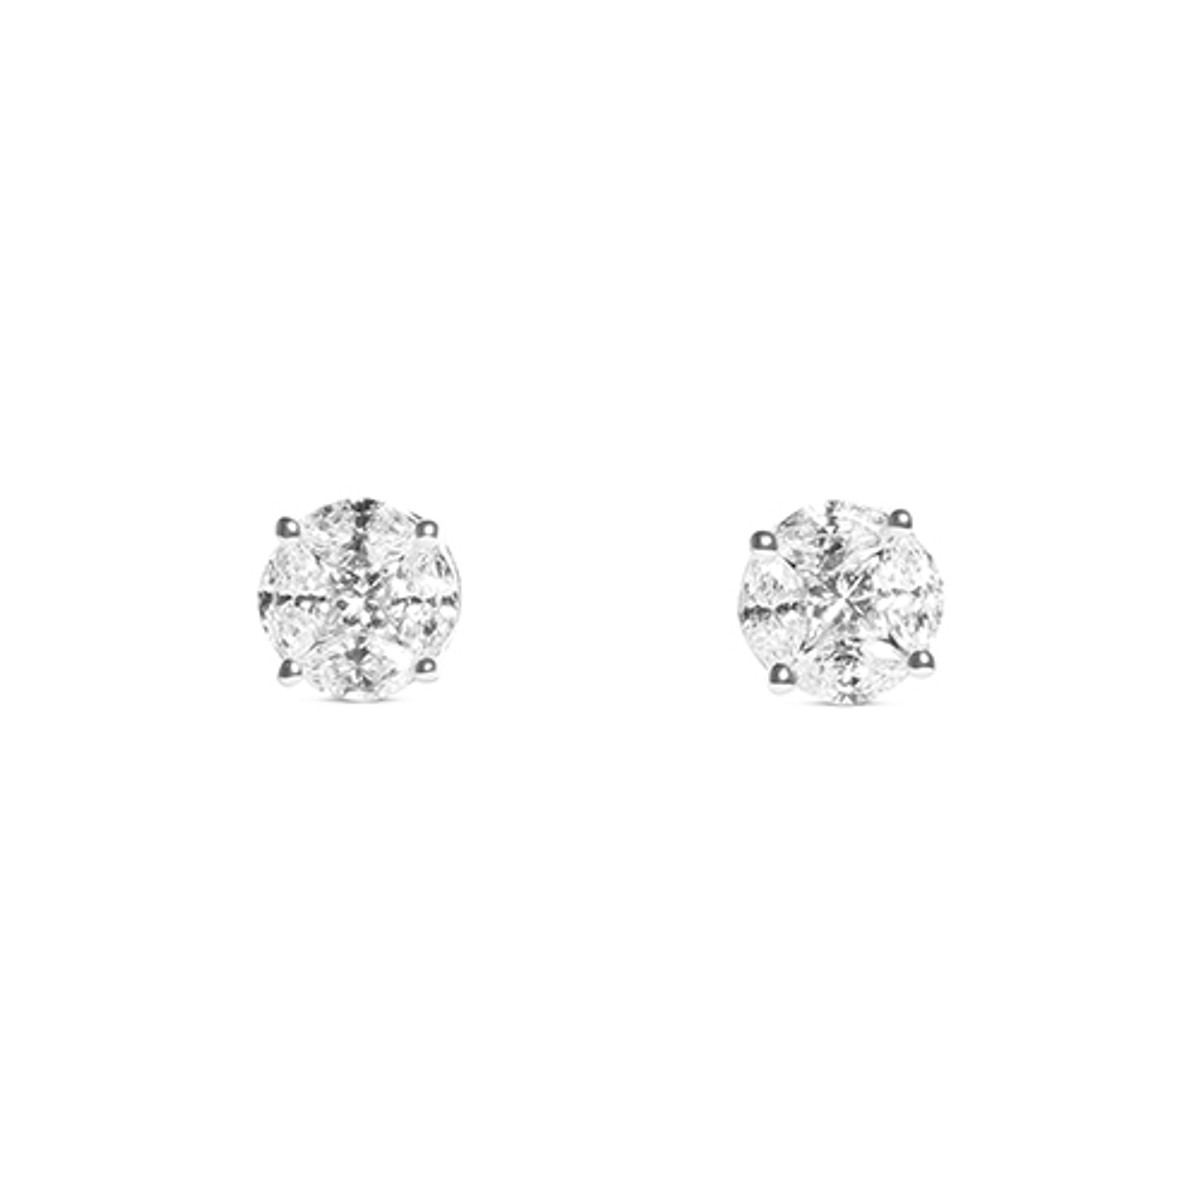 Hyde Park Collection 18K White Gold Marquise and Pear Cluster Diamond Earrings-20851